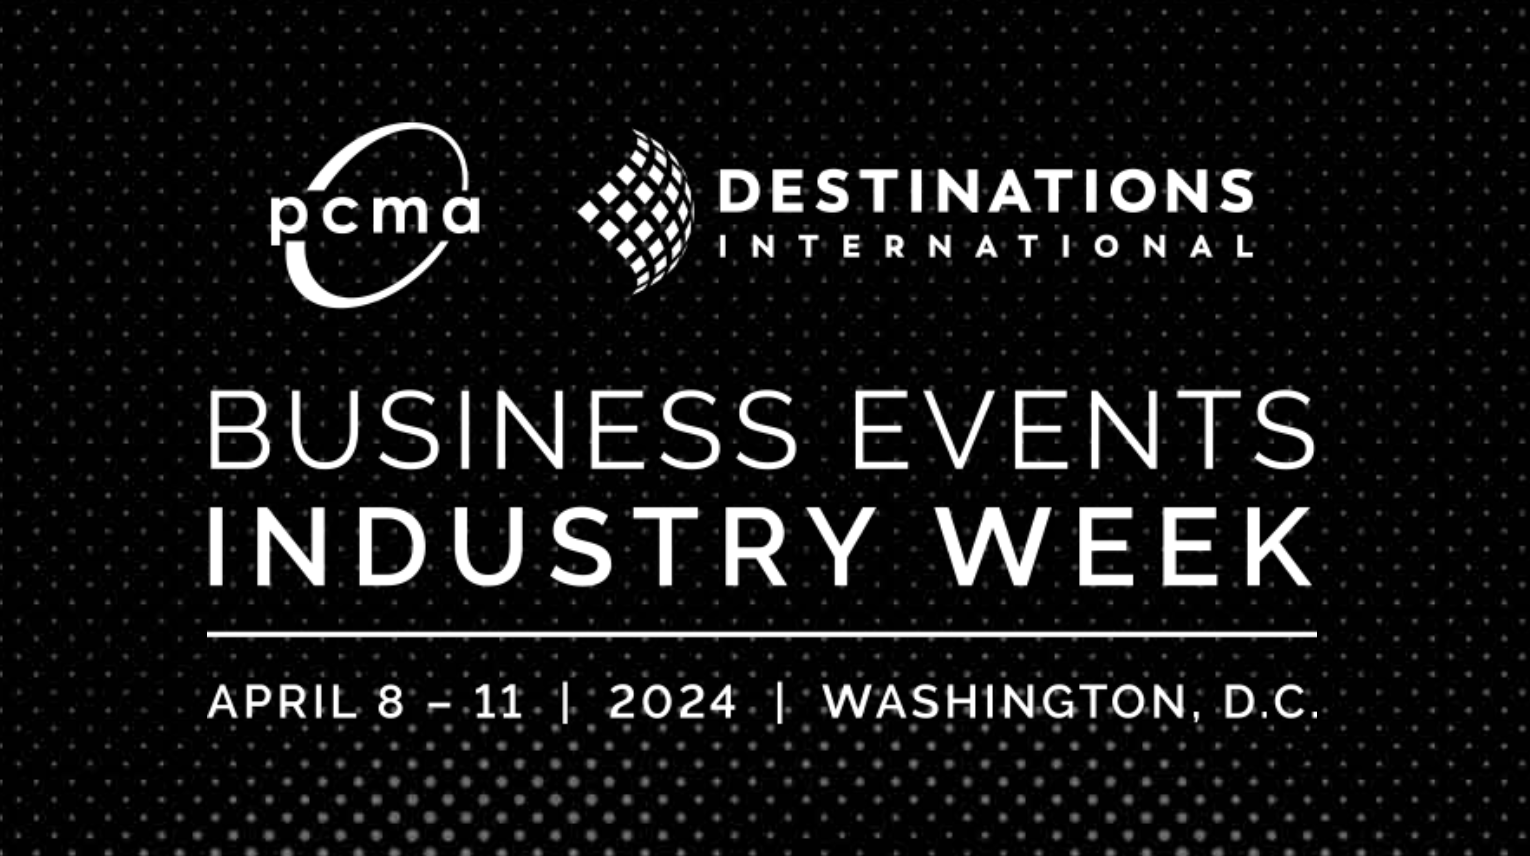 Business Events Industry Week